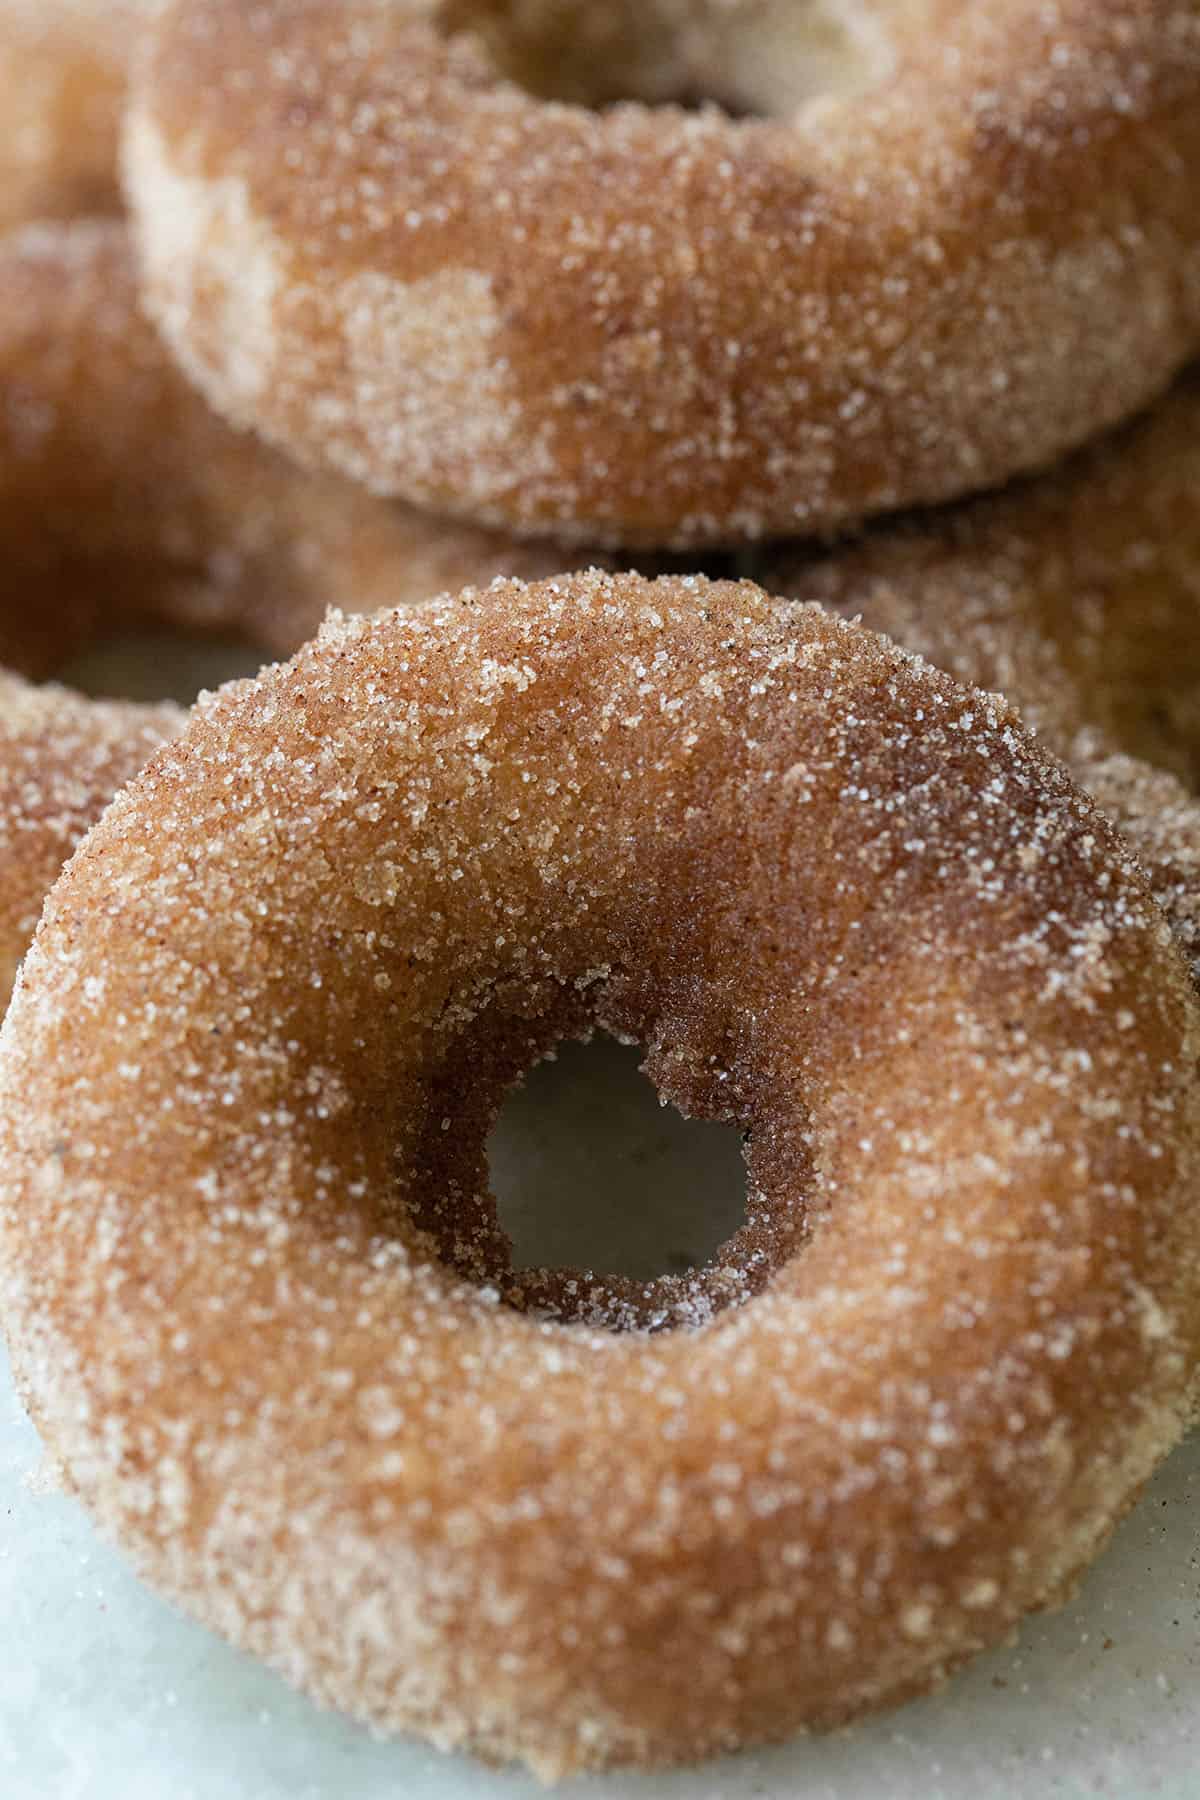 A donut with cinnamon and sugar.